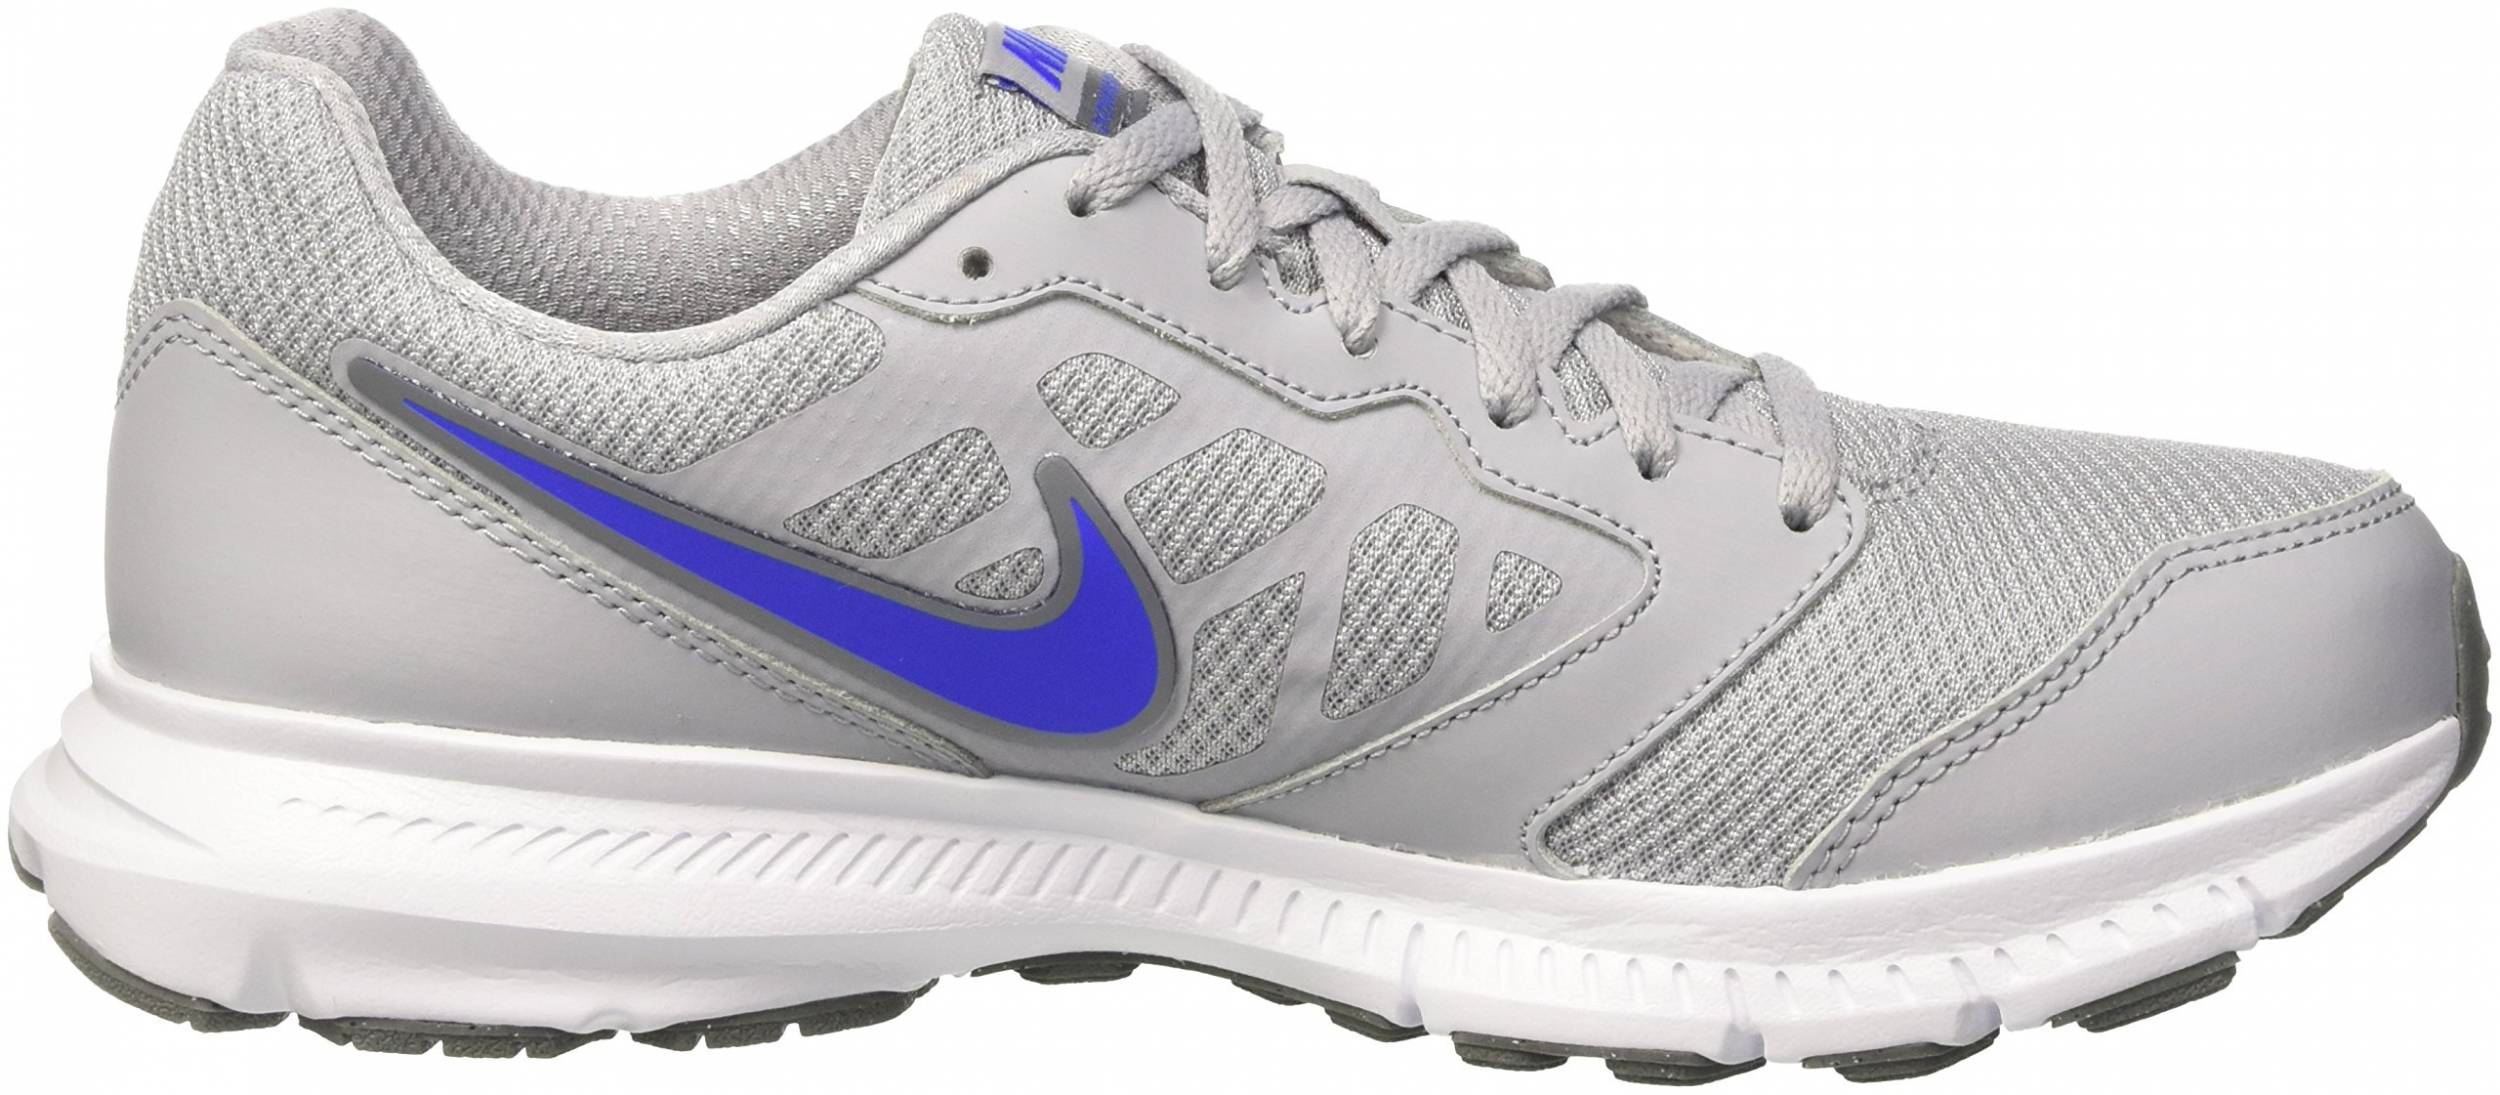 nike downshifter 6 price